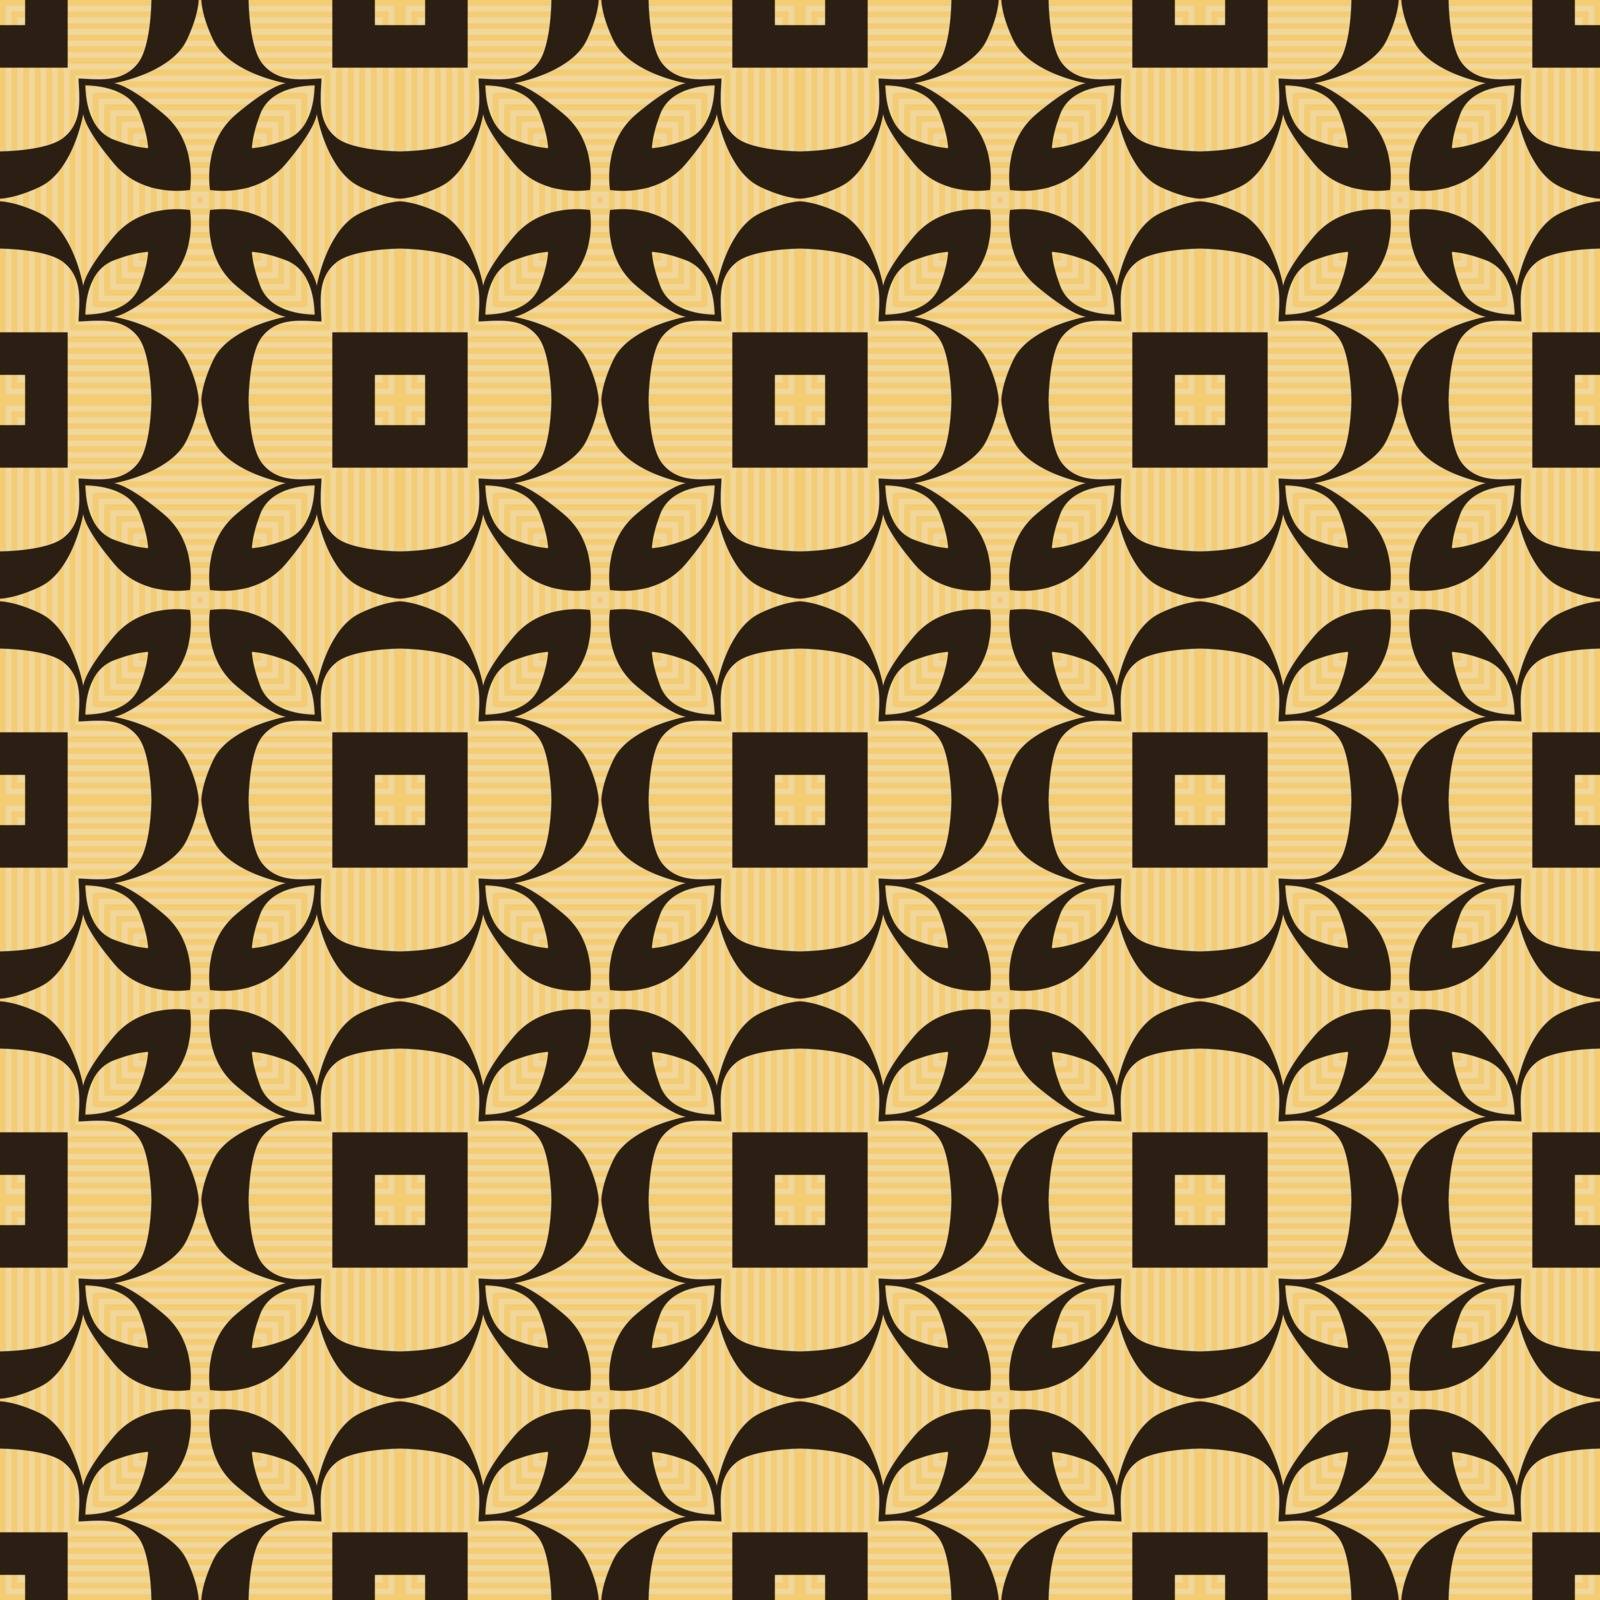 Seamless illustrated pattern made of abstract elements in yellow and black